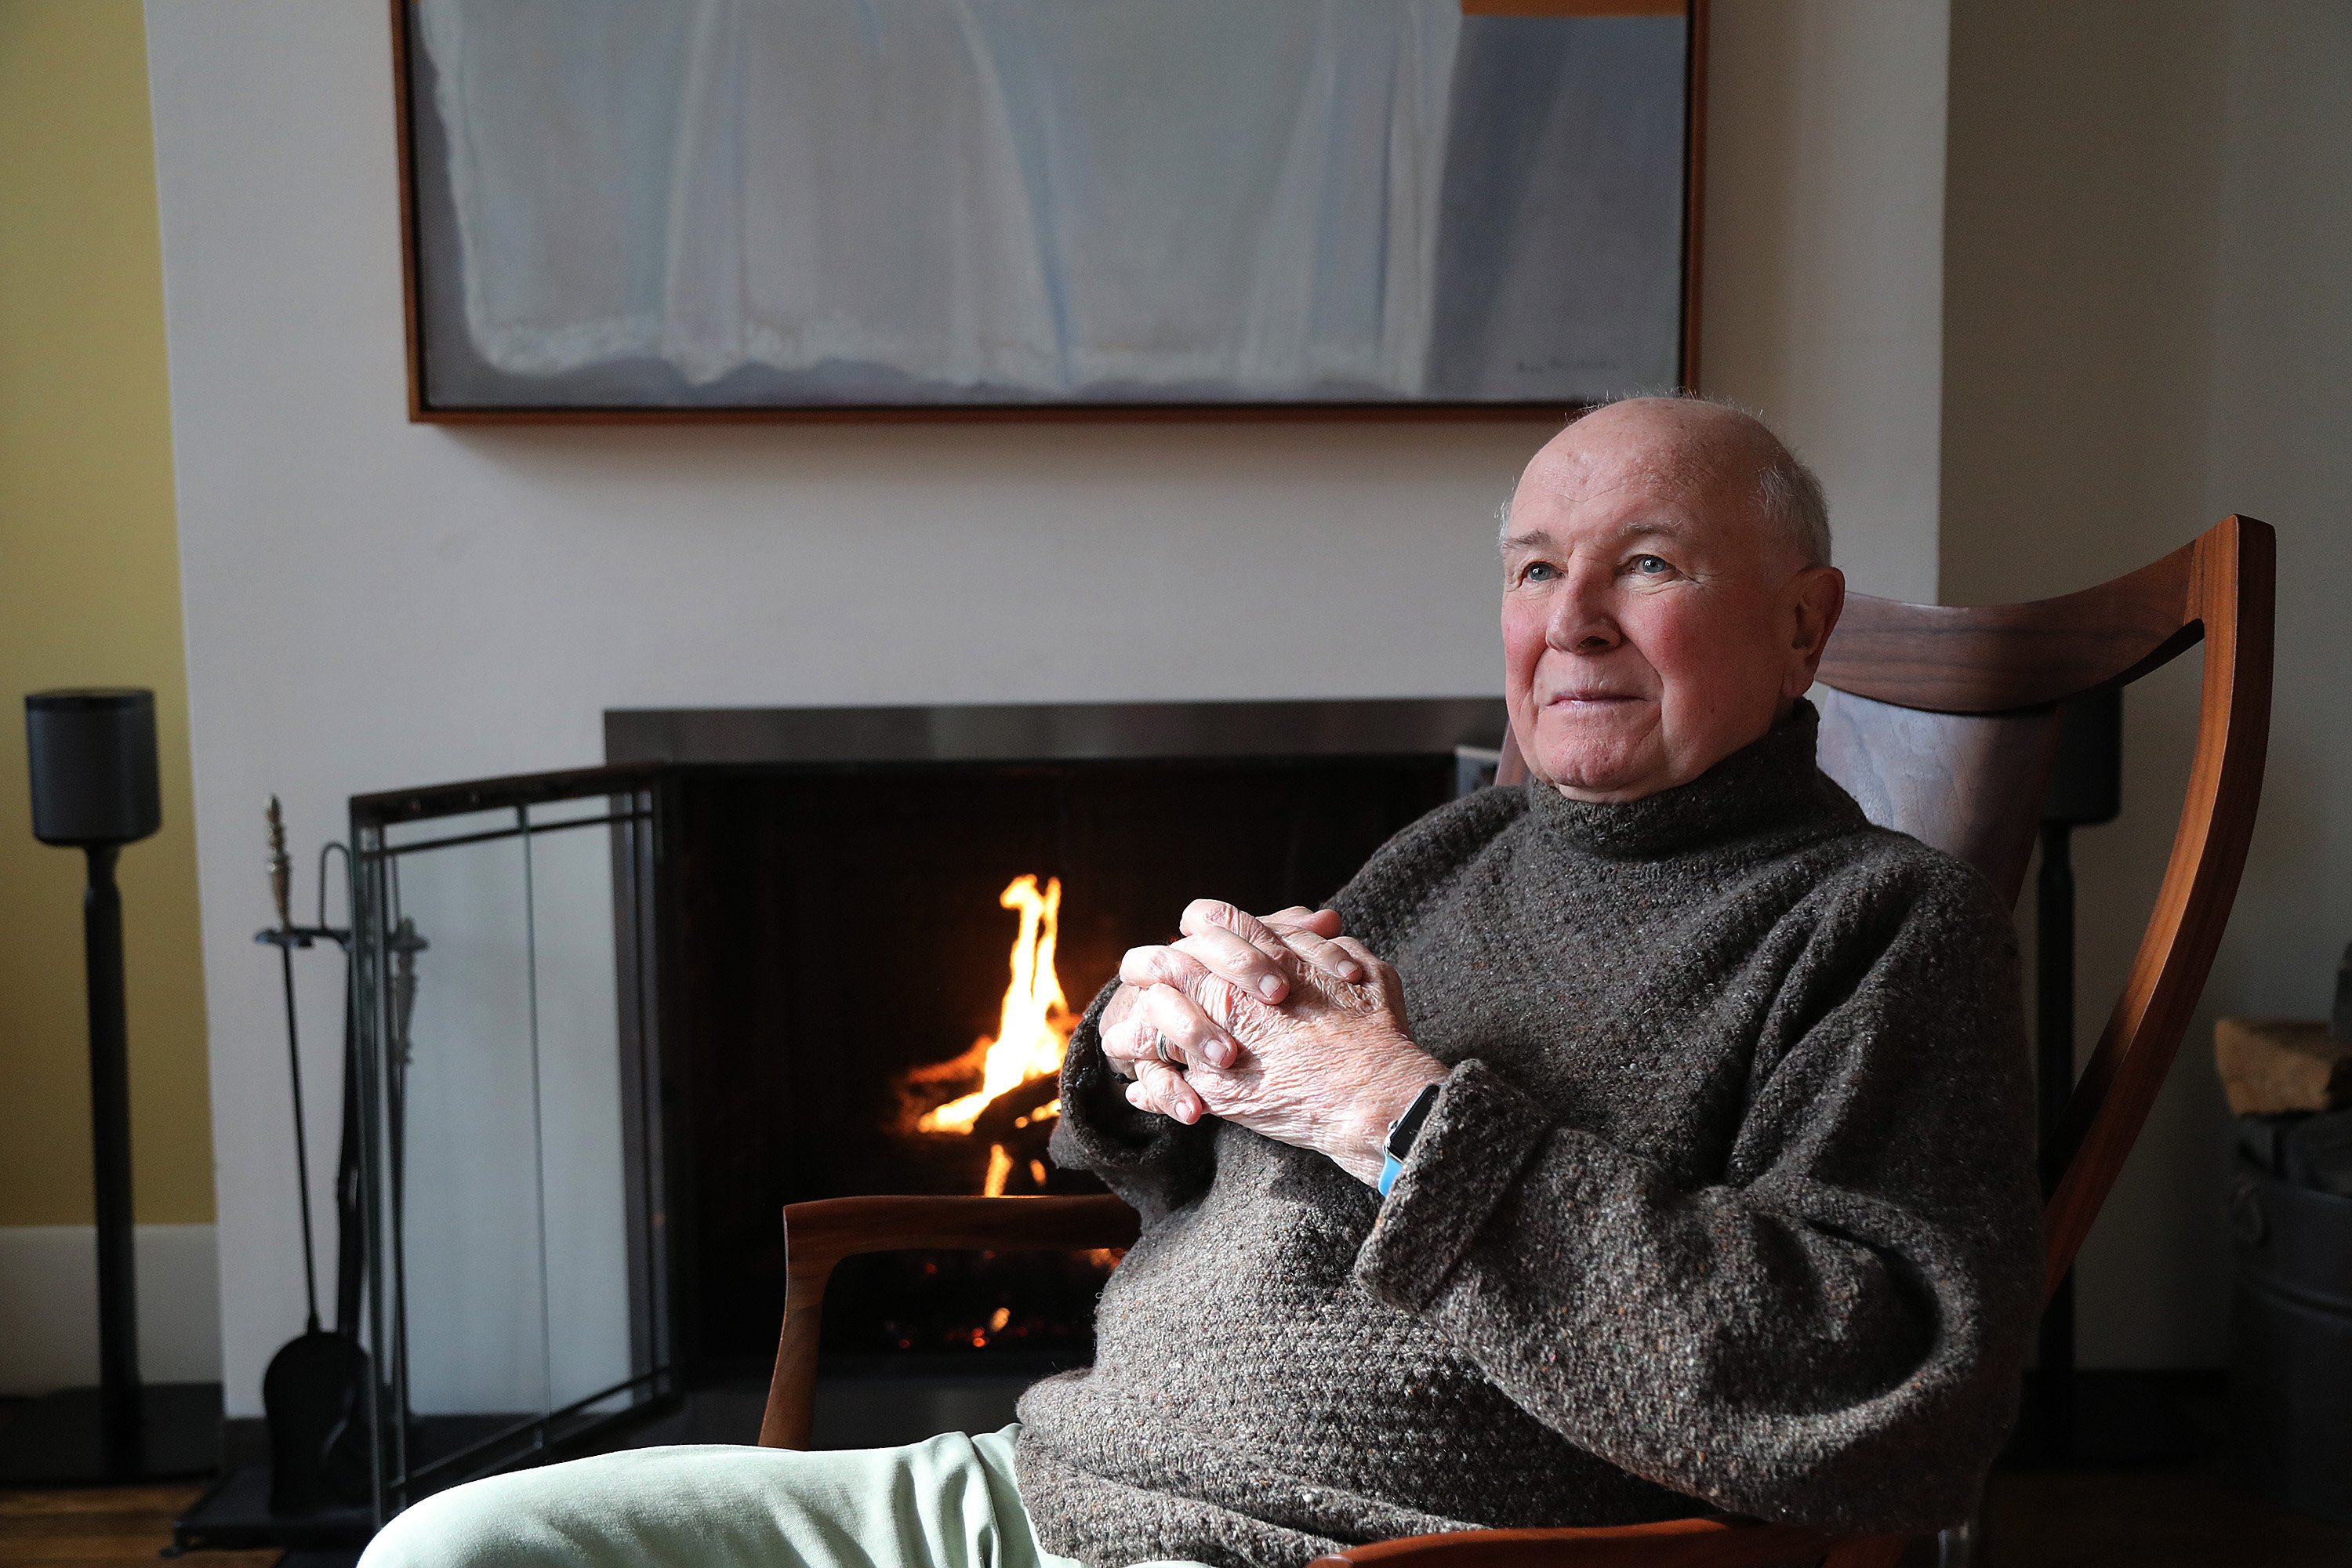 Playwright Terrence McNally appears in a portrait taken in his home on March 2, 2020, in New York City. | Source: Getty Images.